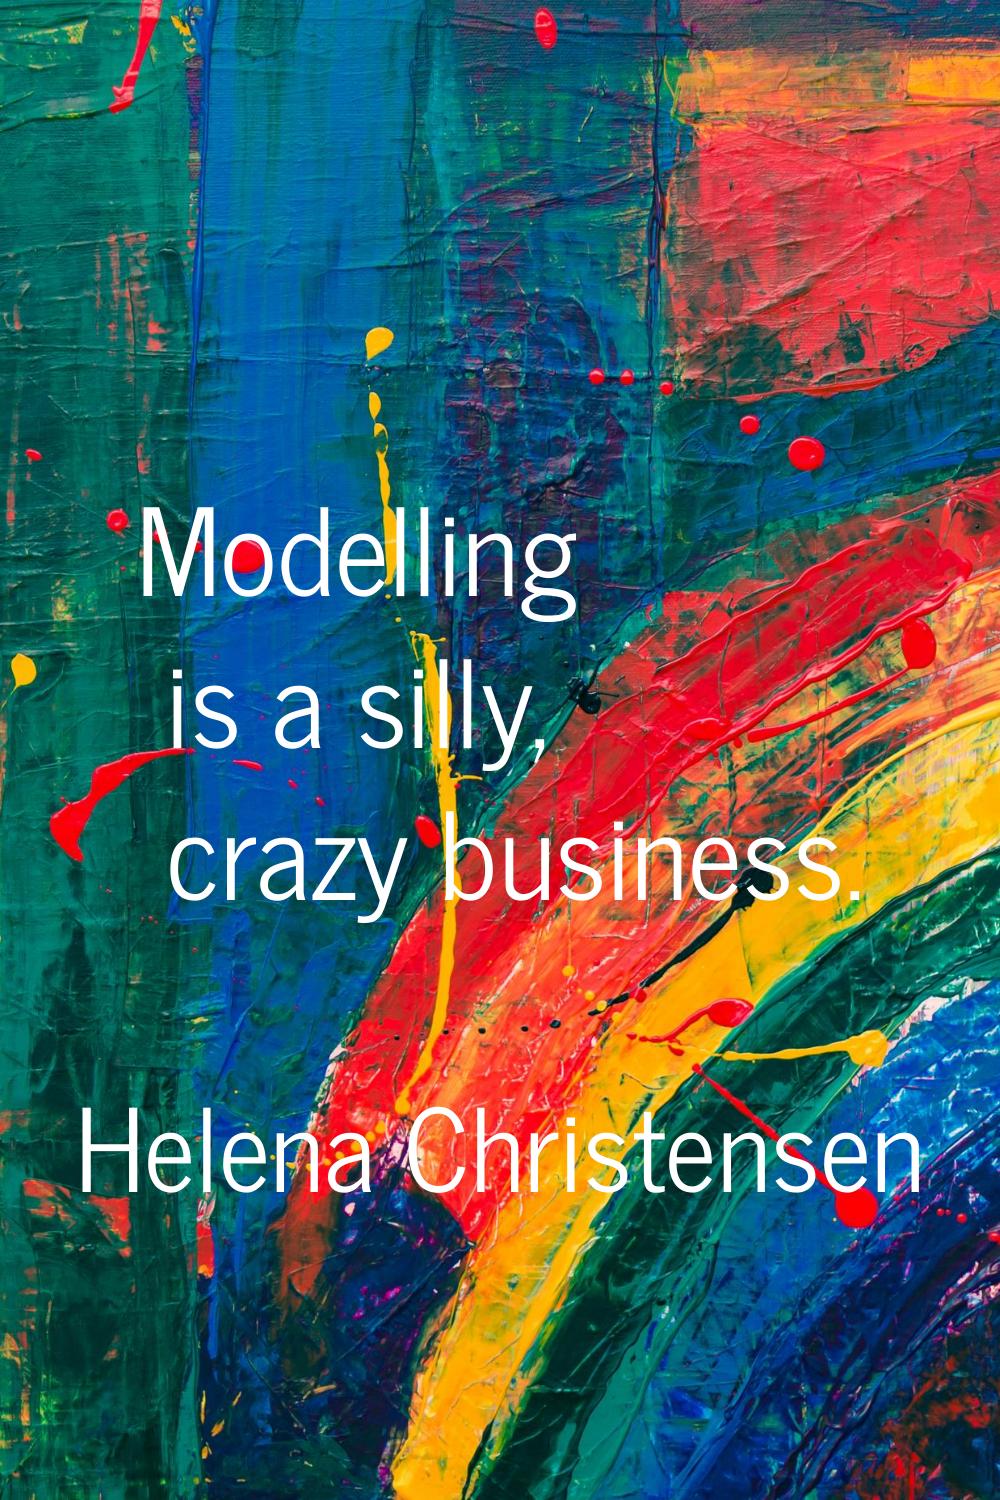 Modelling is a silly, crazy business.